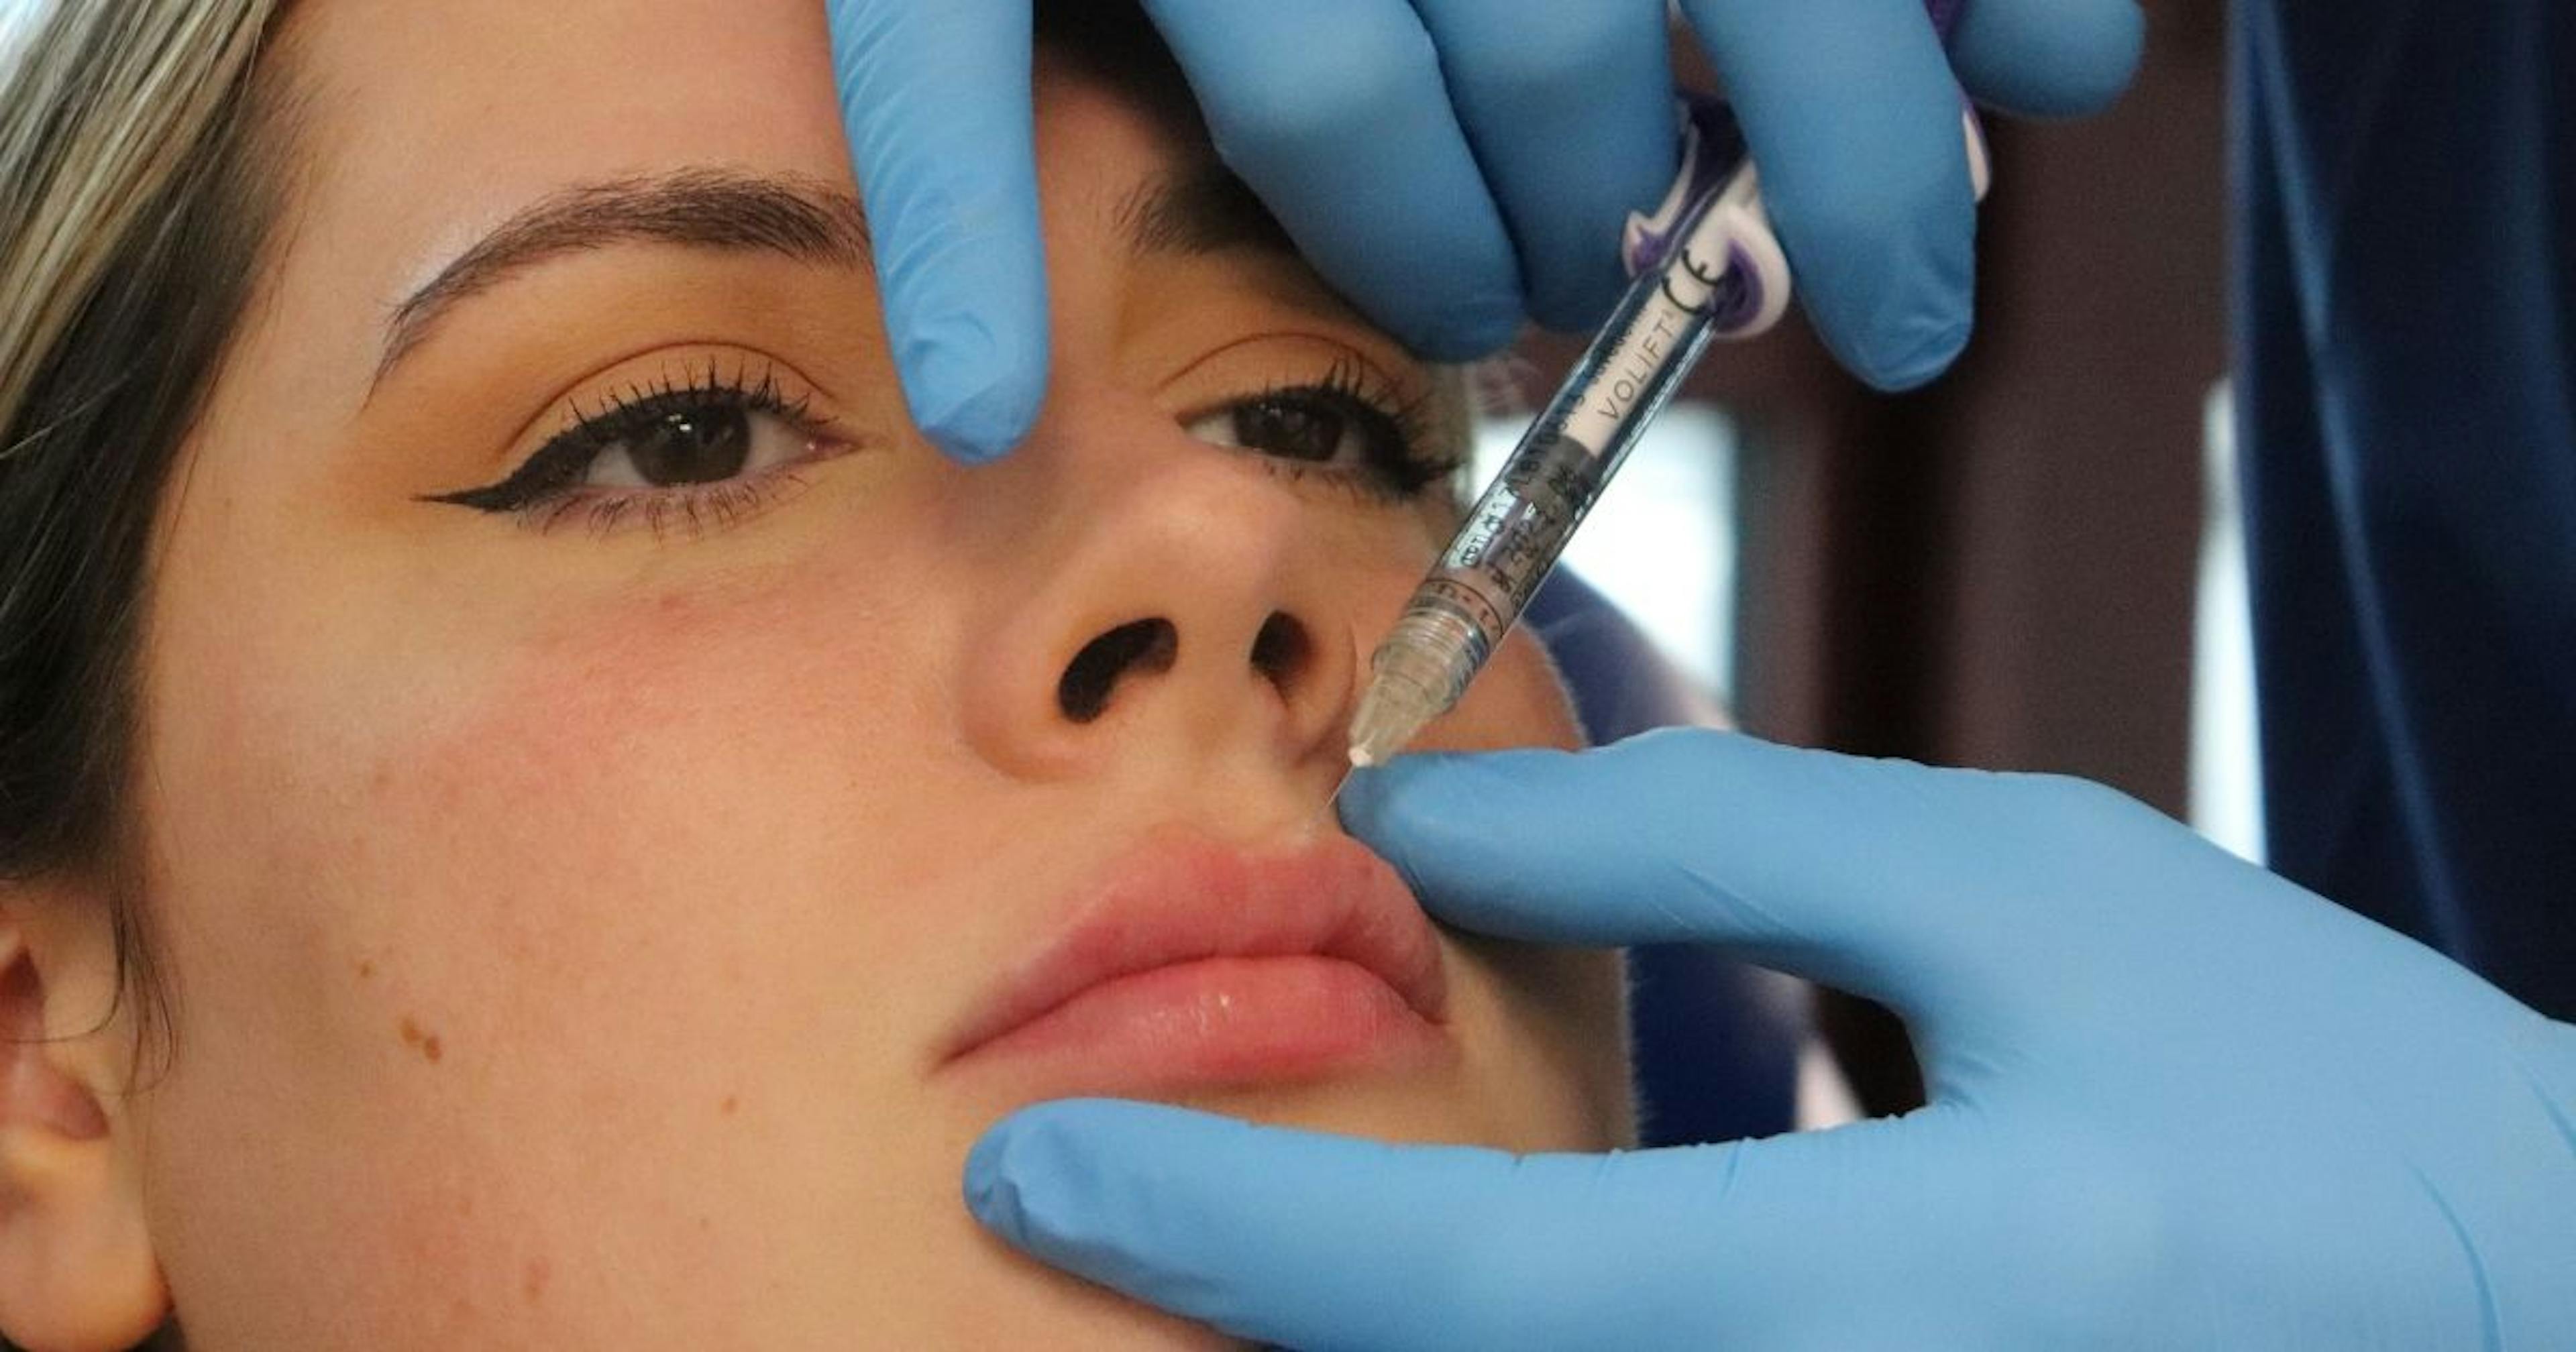 How to Inject Lip Filler Safely and Effectively